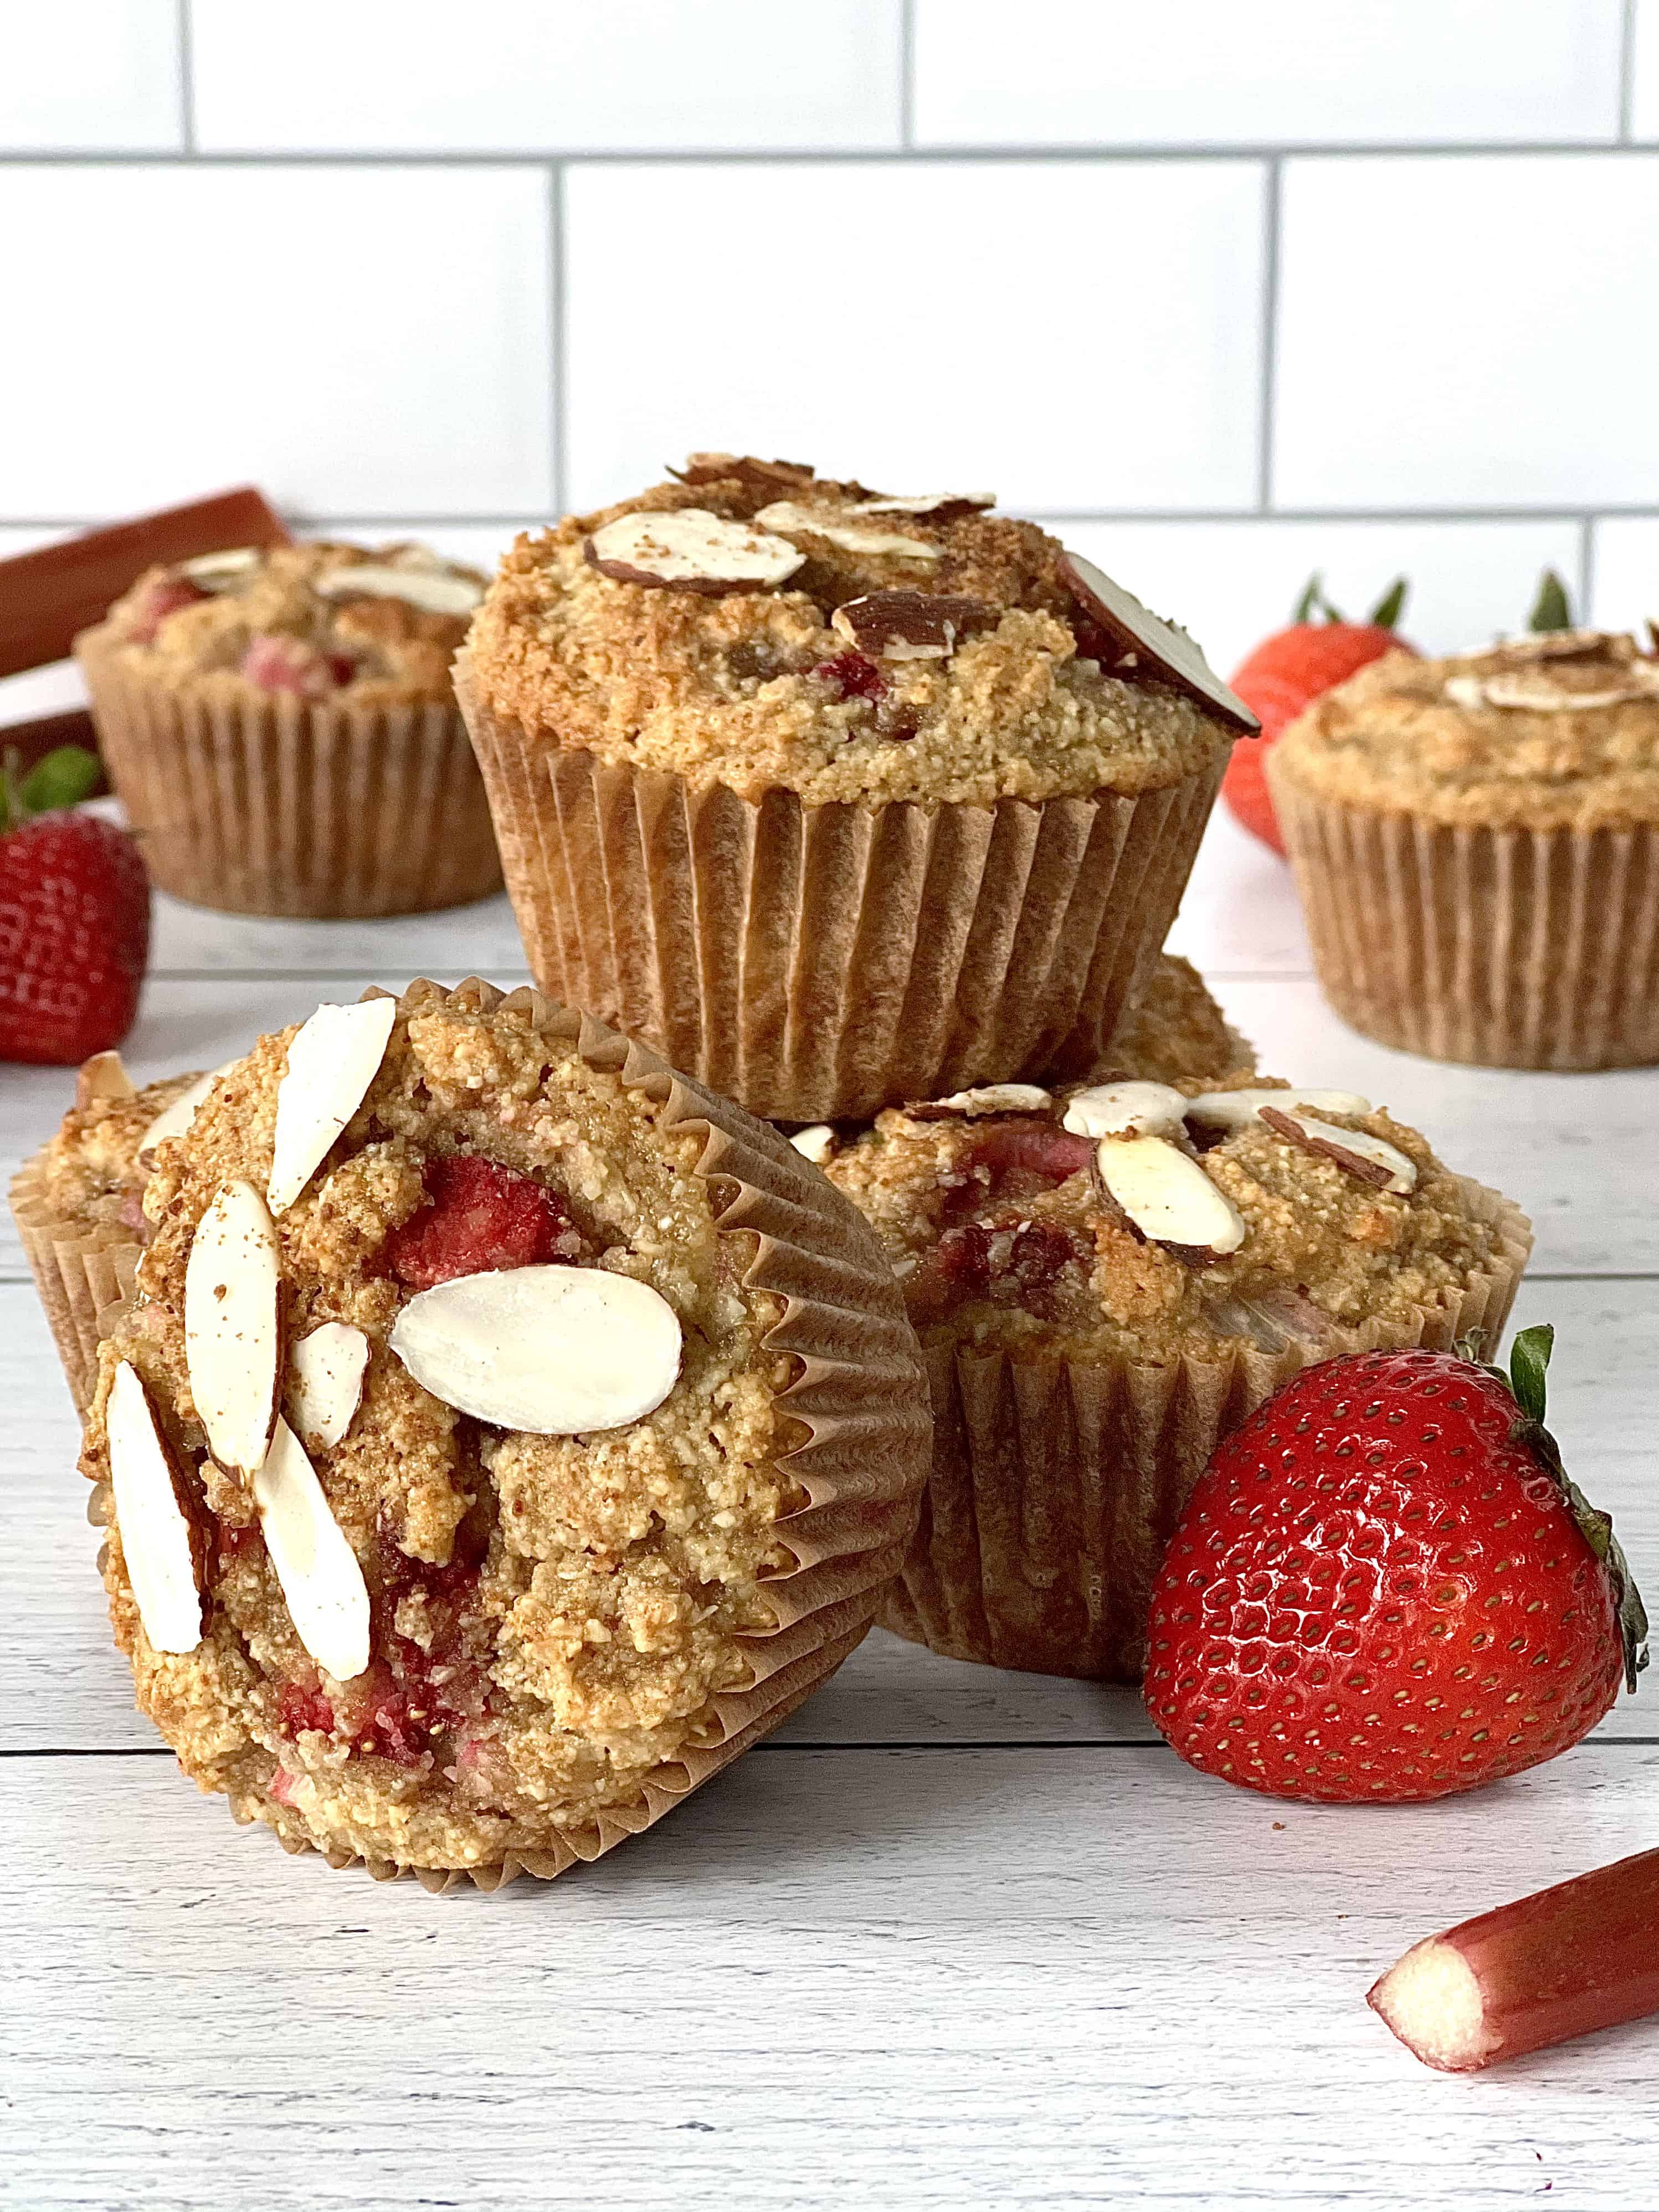 healthy muffins with rhubarb and strawberries in them, topped with sliced almonds, on a white wooden table with rhubarb stalks and strawberries